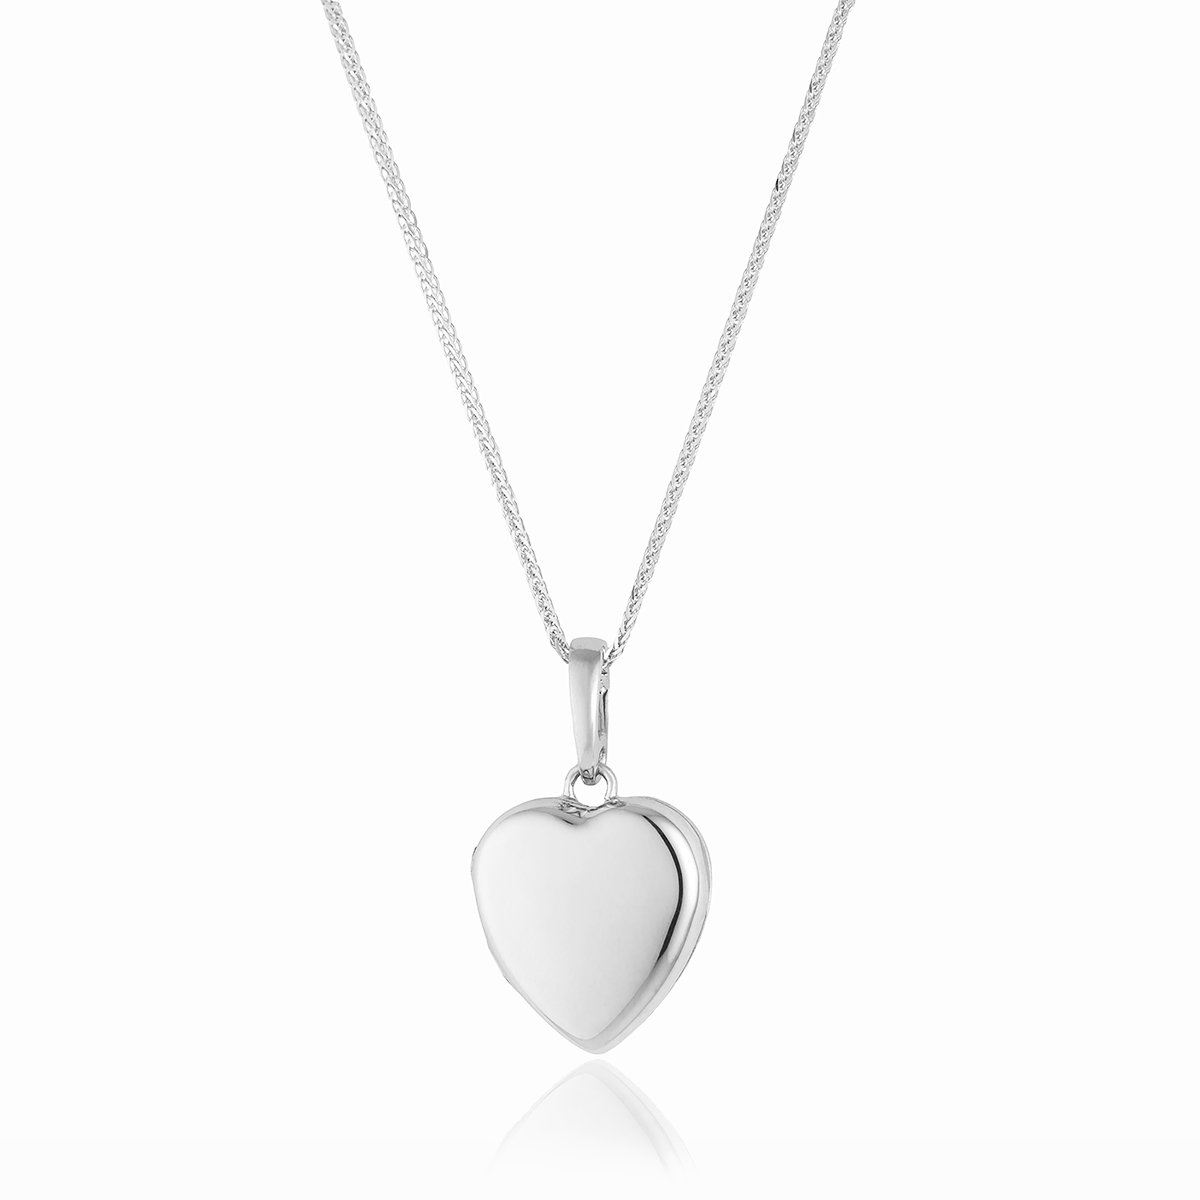 18 ct petite white gold heart locket on an 18 ct white gold franco chain